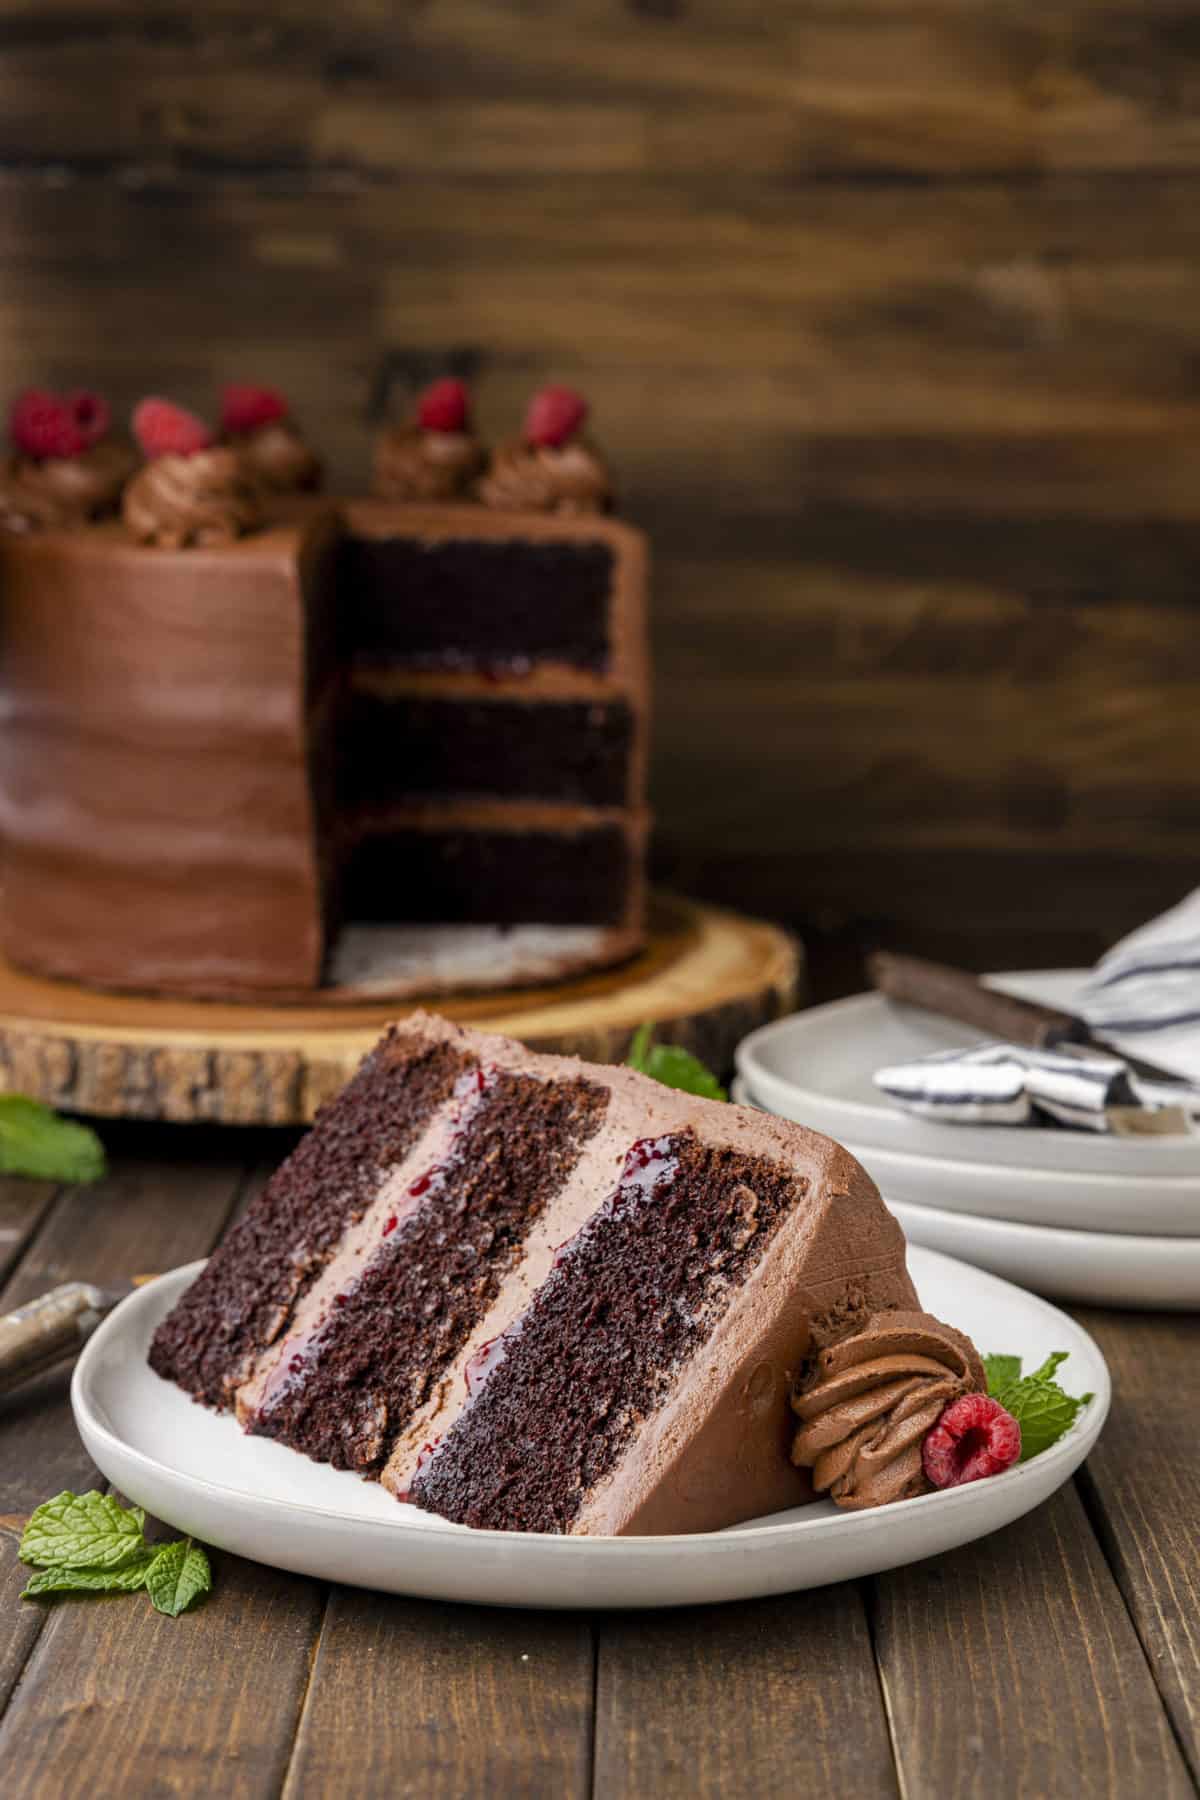 Slice of chocolate raspberry cake on white plate, with remaining cake in background